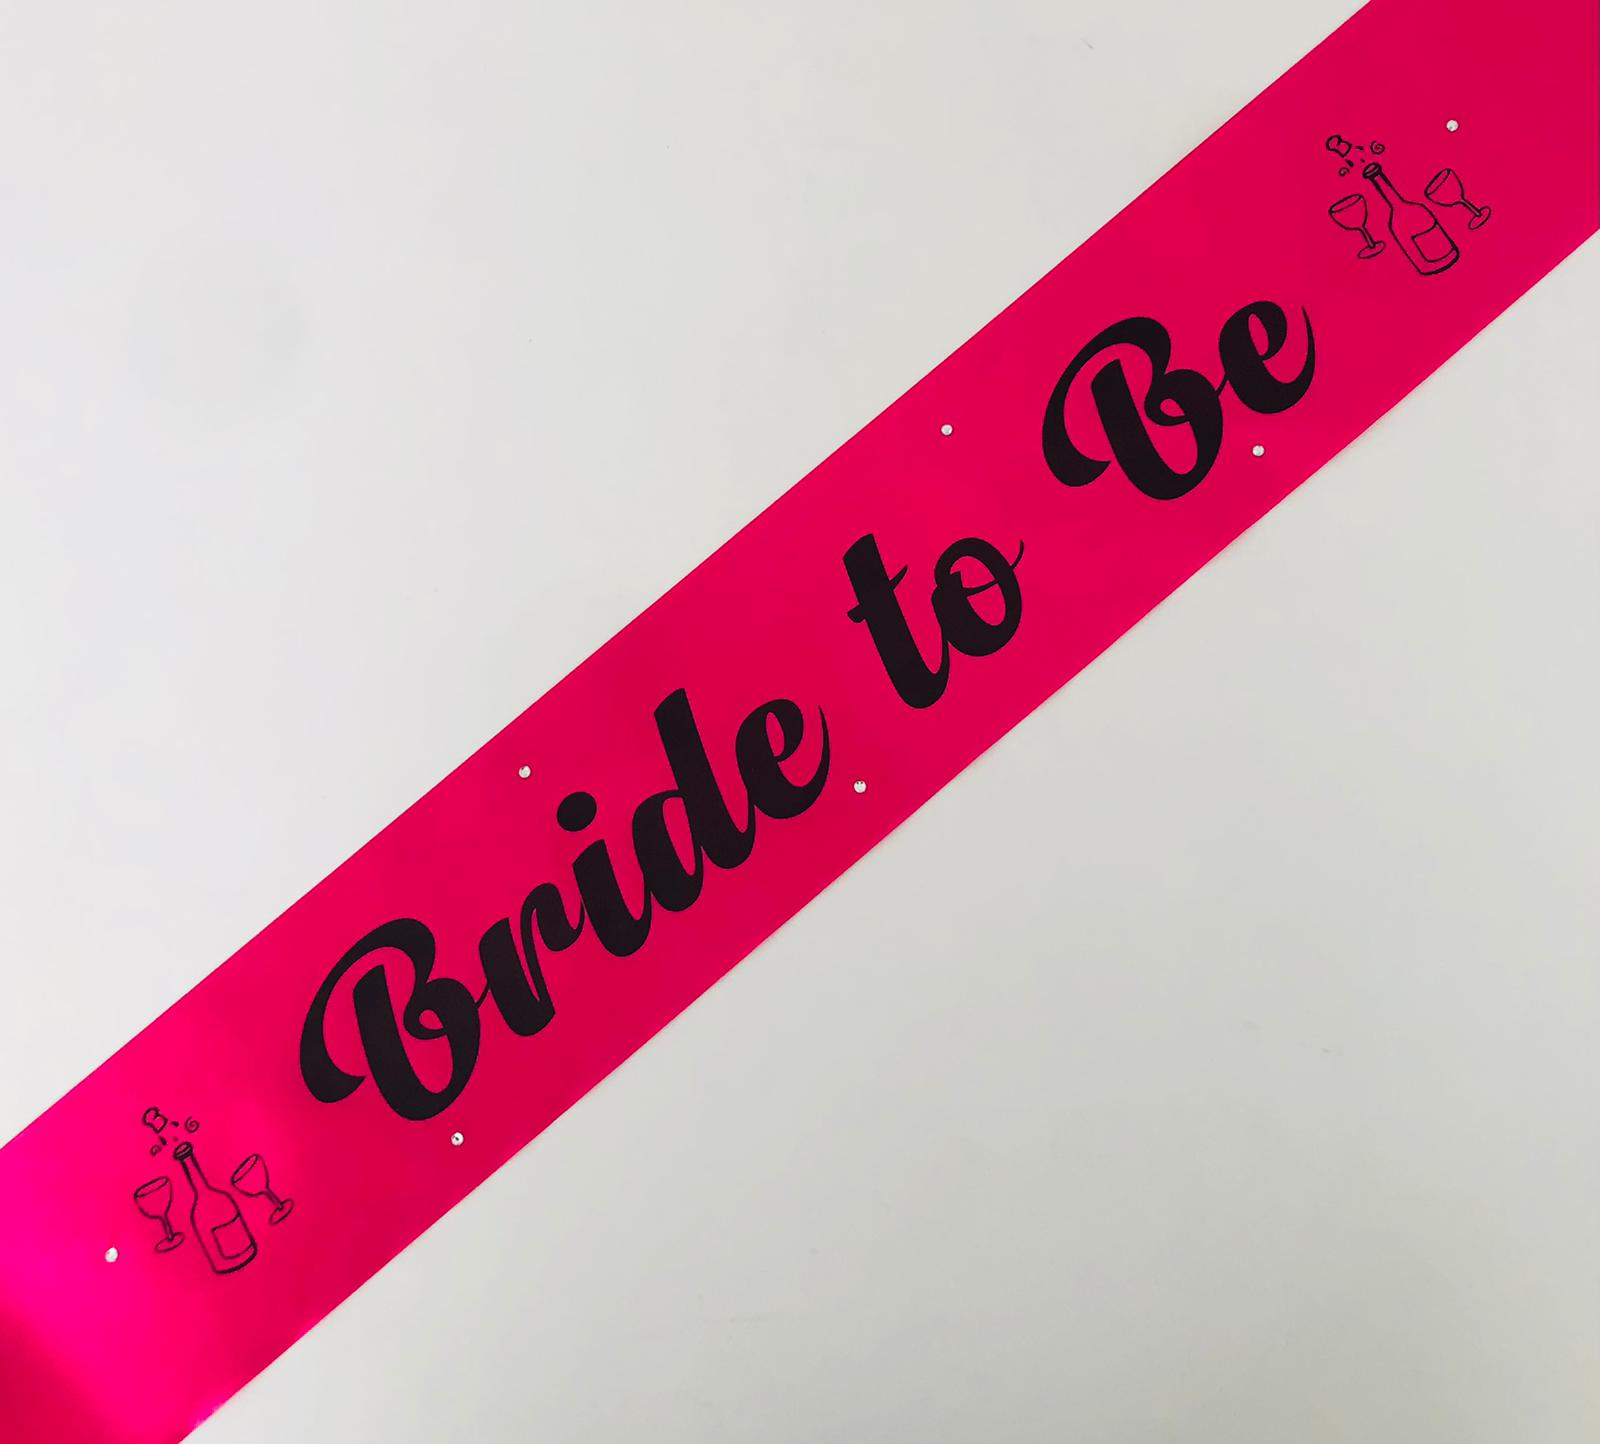 Bride to Be Sash with Champagne picture - Hot Pink with Black Handmade